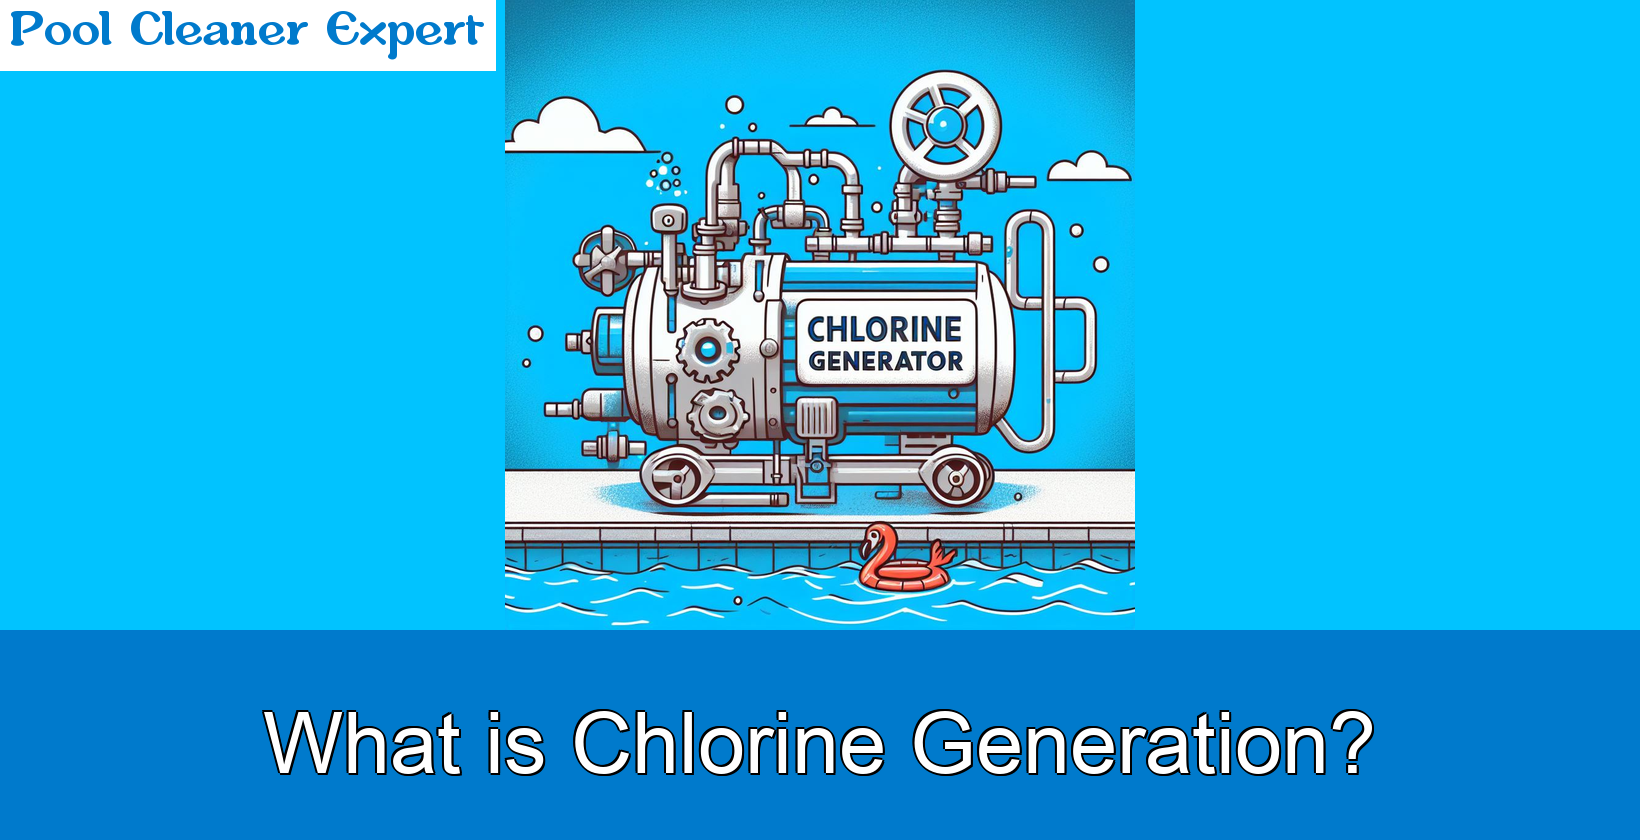 Chlorine Generation in Pools: All You Need to Know